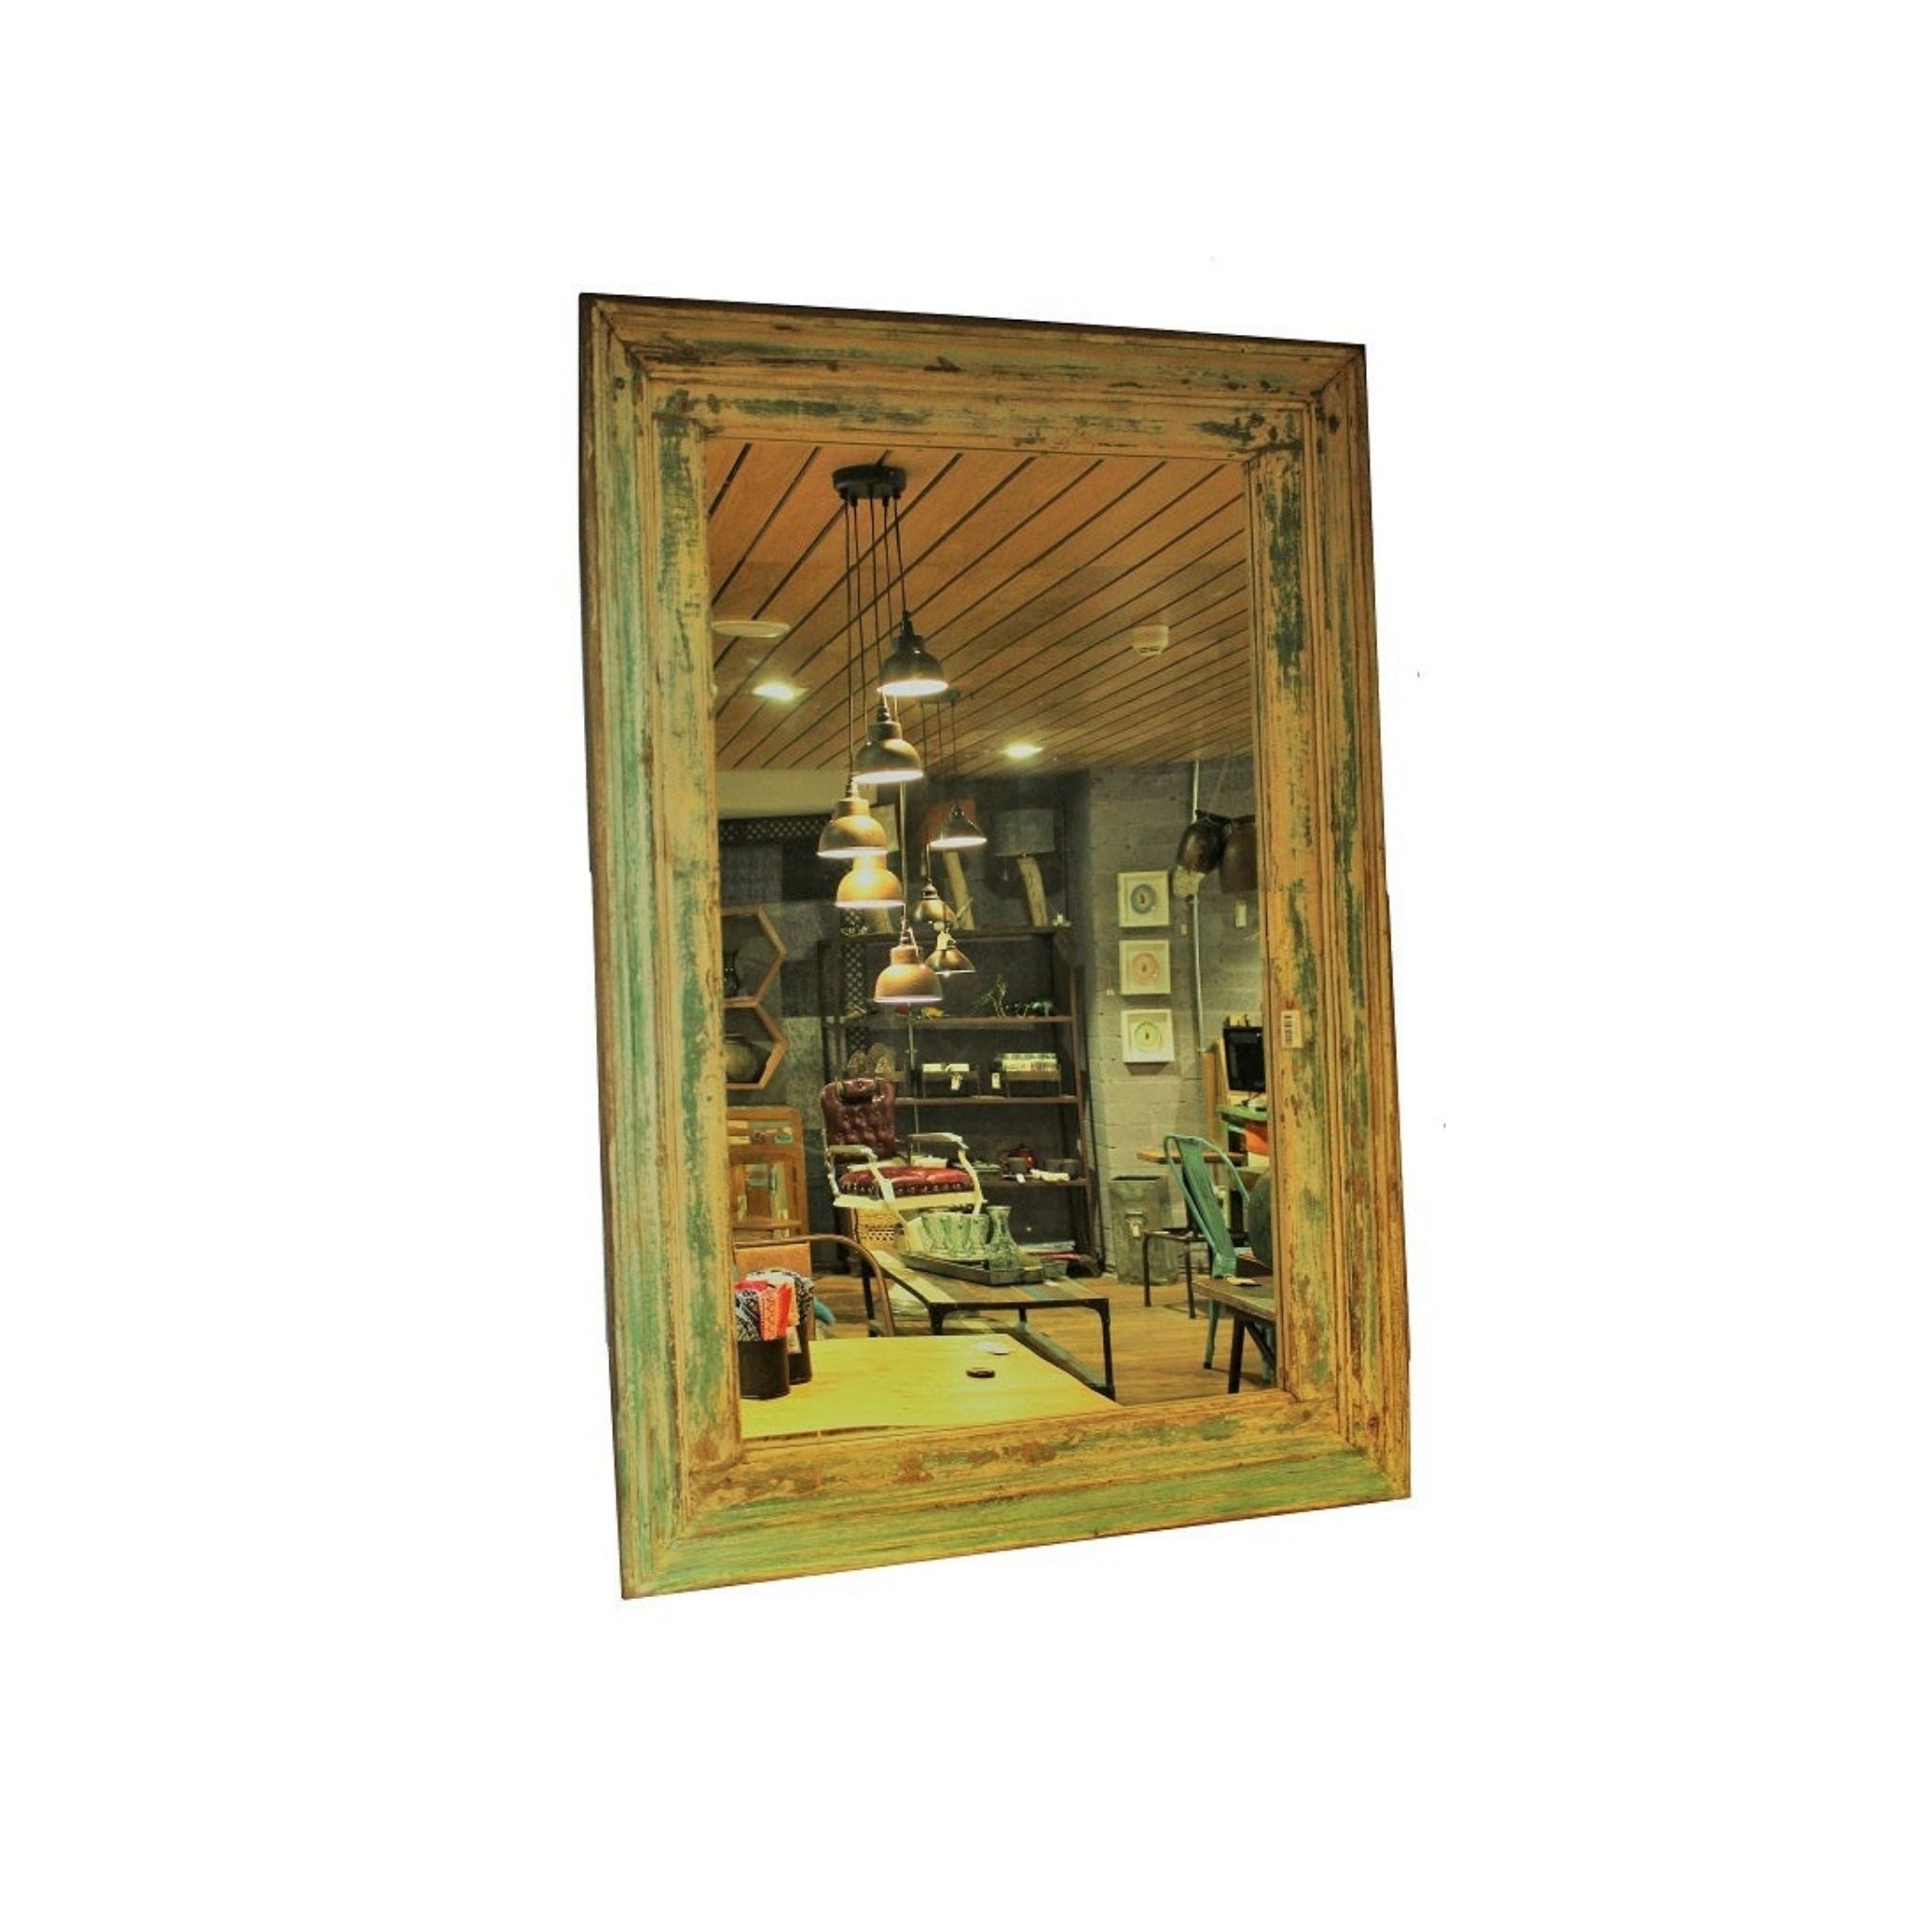 Large Rustic Louisiana Wall Mirror distress yellow  patina side view of product on white background